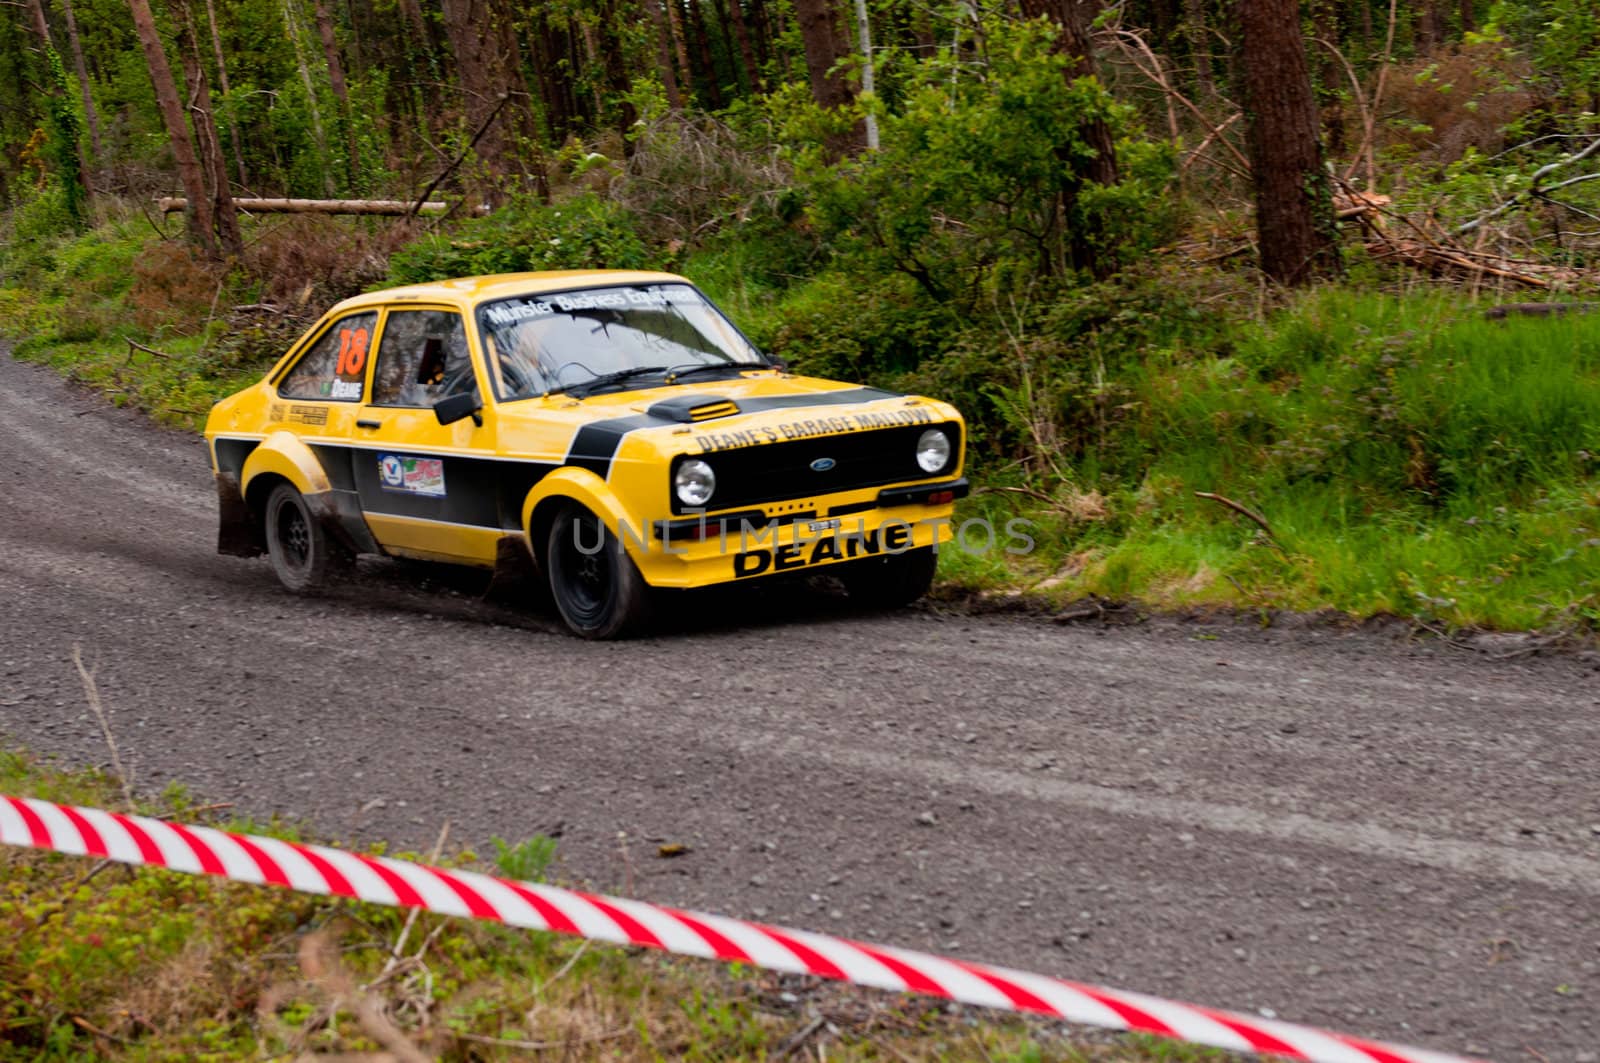 MALLOW, IRELAND - MAY 19: J. Deane driving Ford Escort at the Jim Walsh Cork Forest Rally on May 19, 2012 in Mallow, Ireland. 4th round of the Valvoline National Forest Rally Championship.